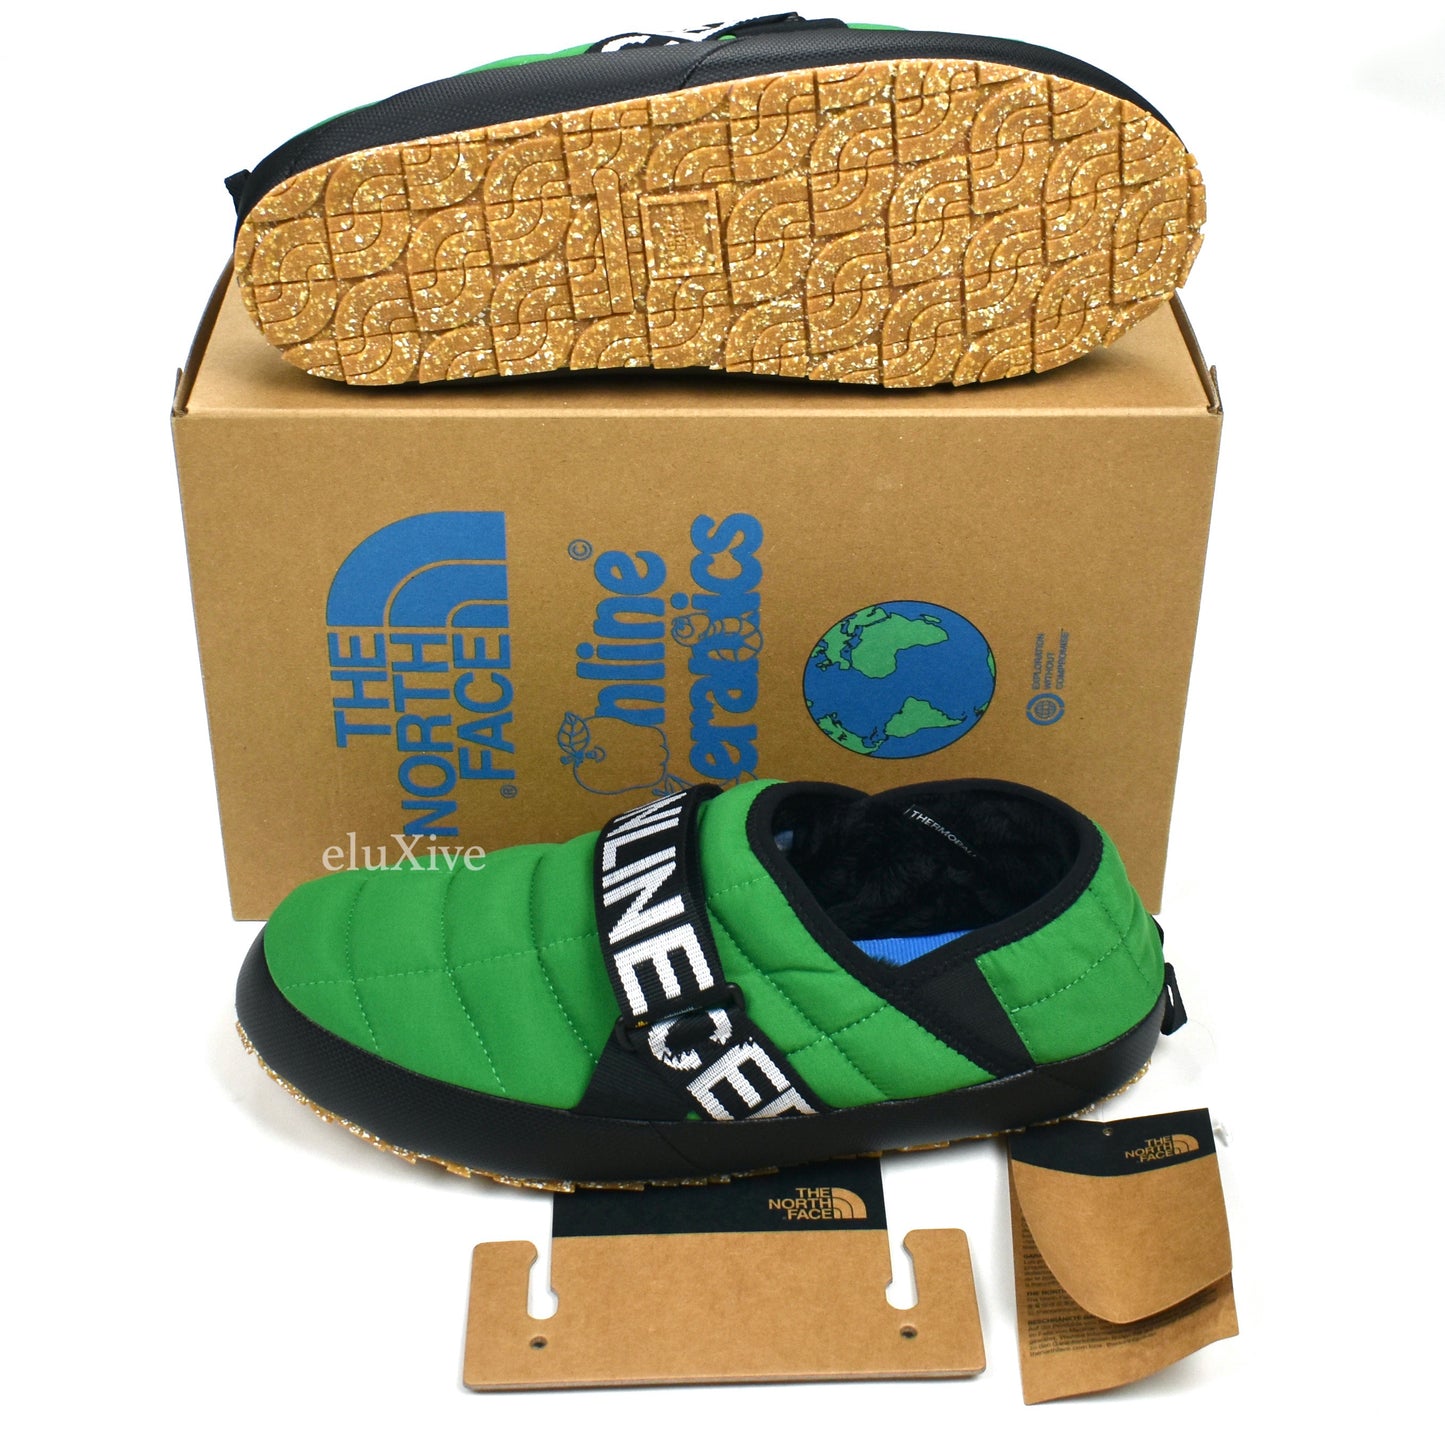 Online Ceramics x The North Face - Green Sherpa Taction Mule